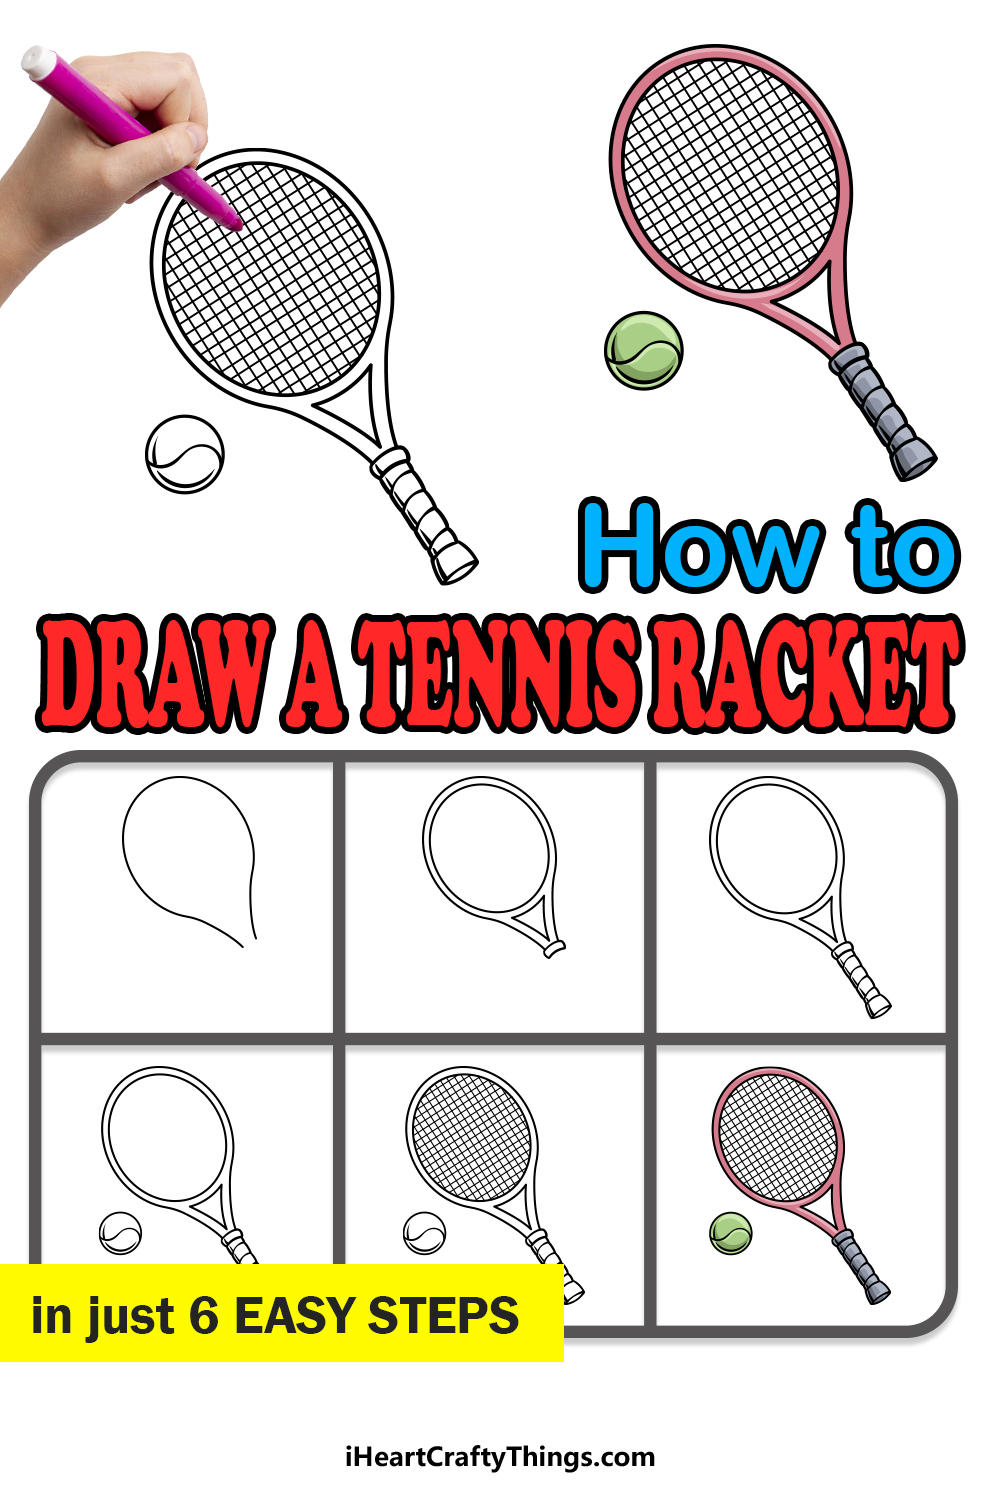 how to draw a Tennis Racket in 6 easy steps